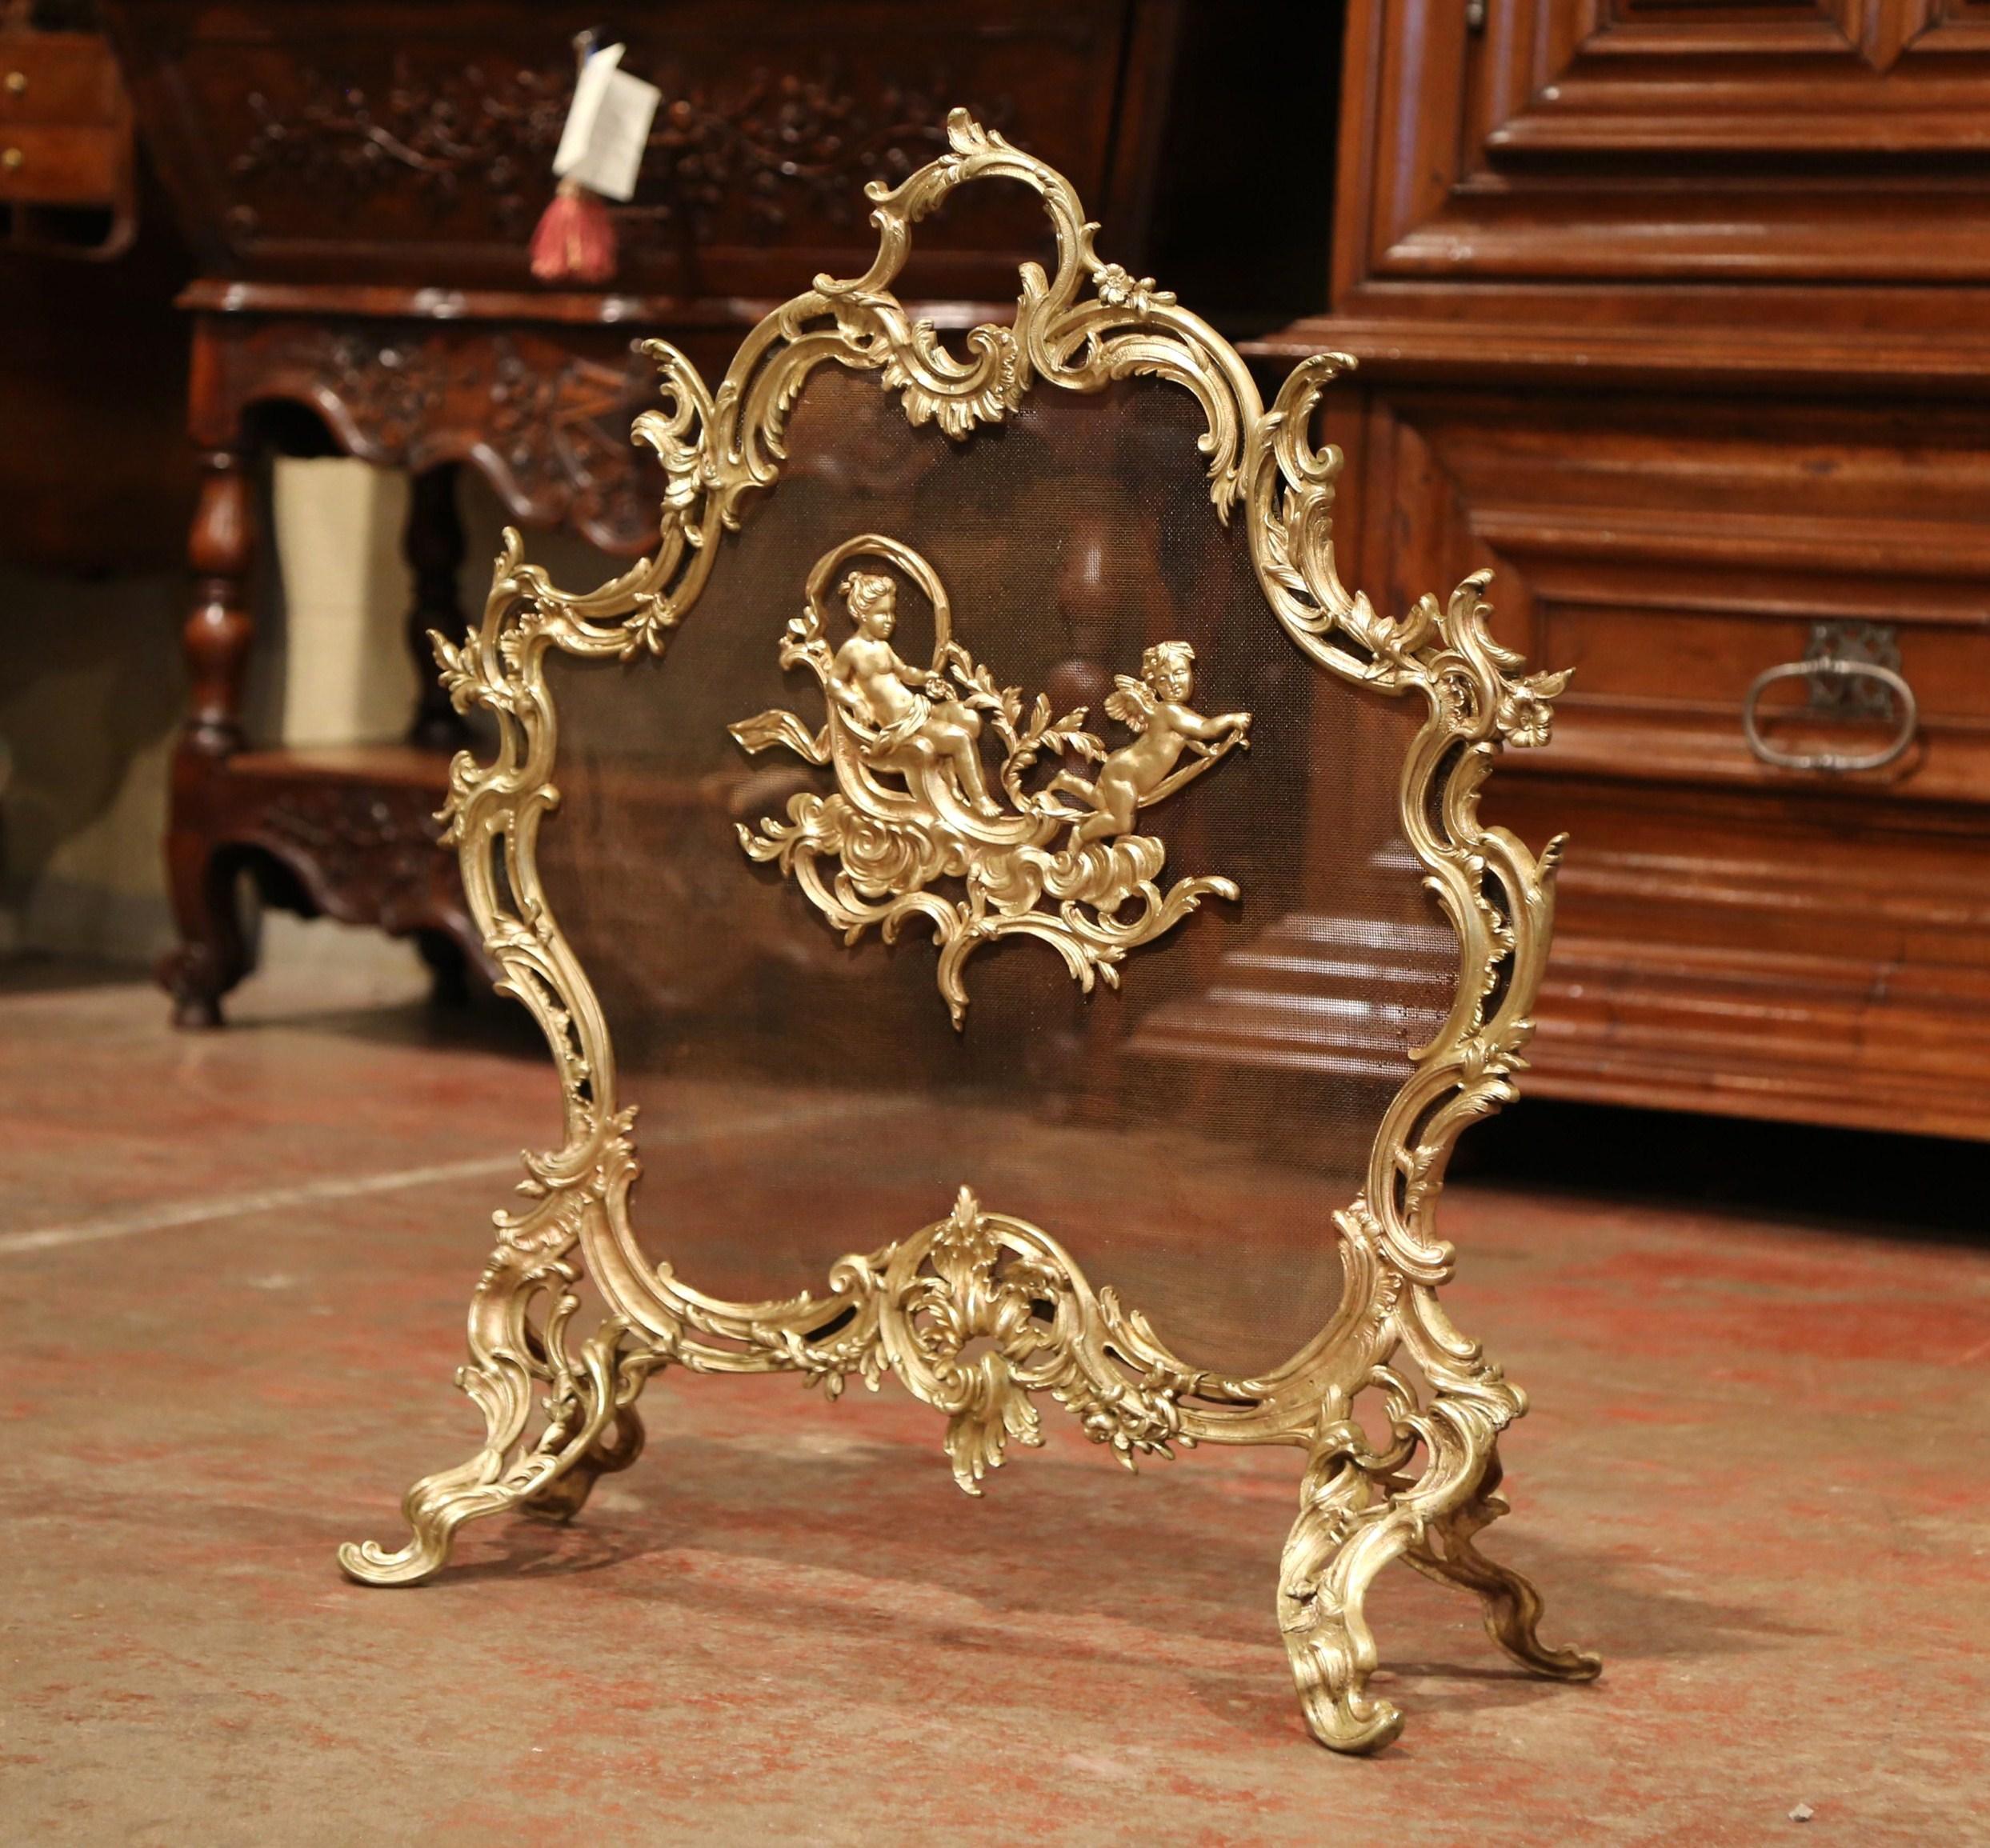 Decorate your fireplace with this antique Rococo bronze screen from France. Crafted circa 1870, the cartouche shaped screen sits on four scrolled feet and features Louis XV style motifs including asymmetrical foliage swaths with a center medallion